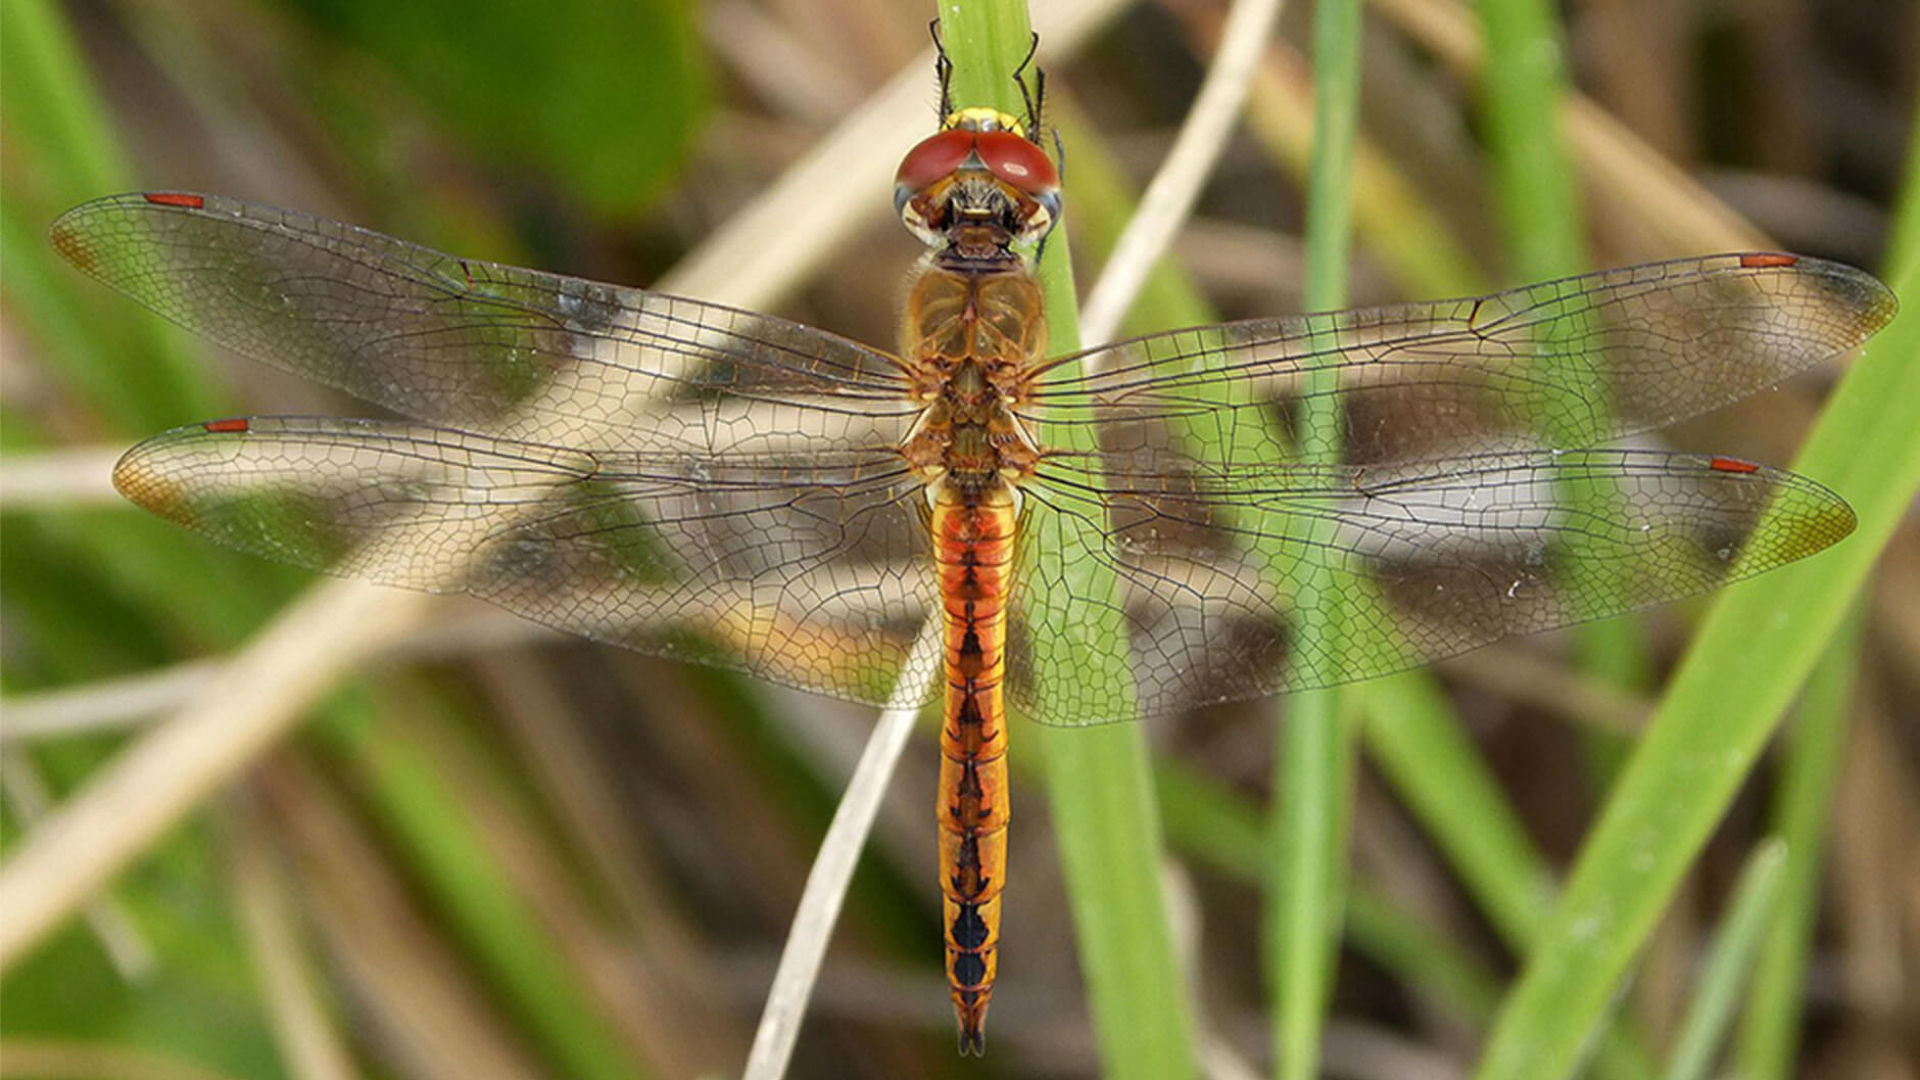 The wandering glider dragonfly is known for the farthest migration in the insect world.